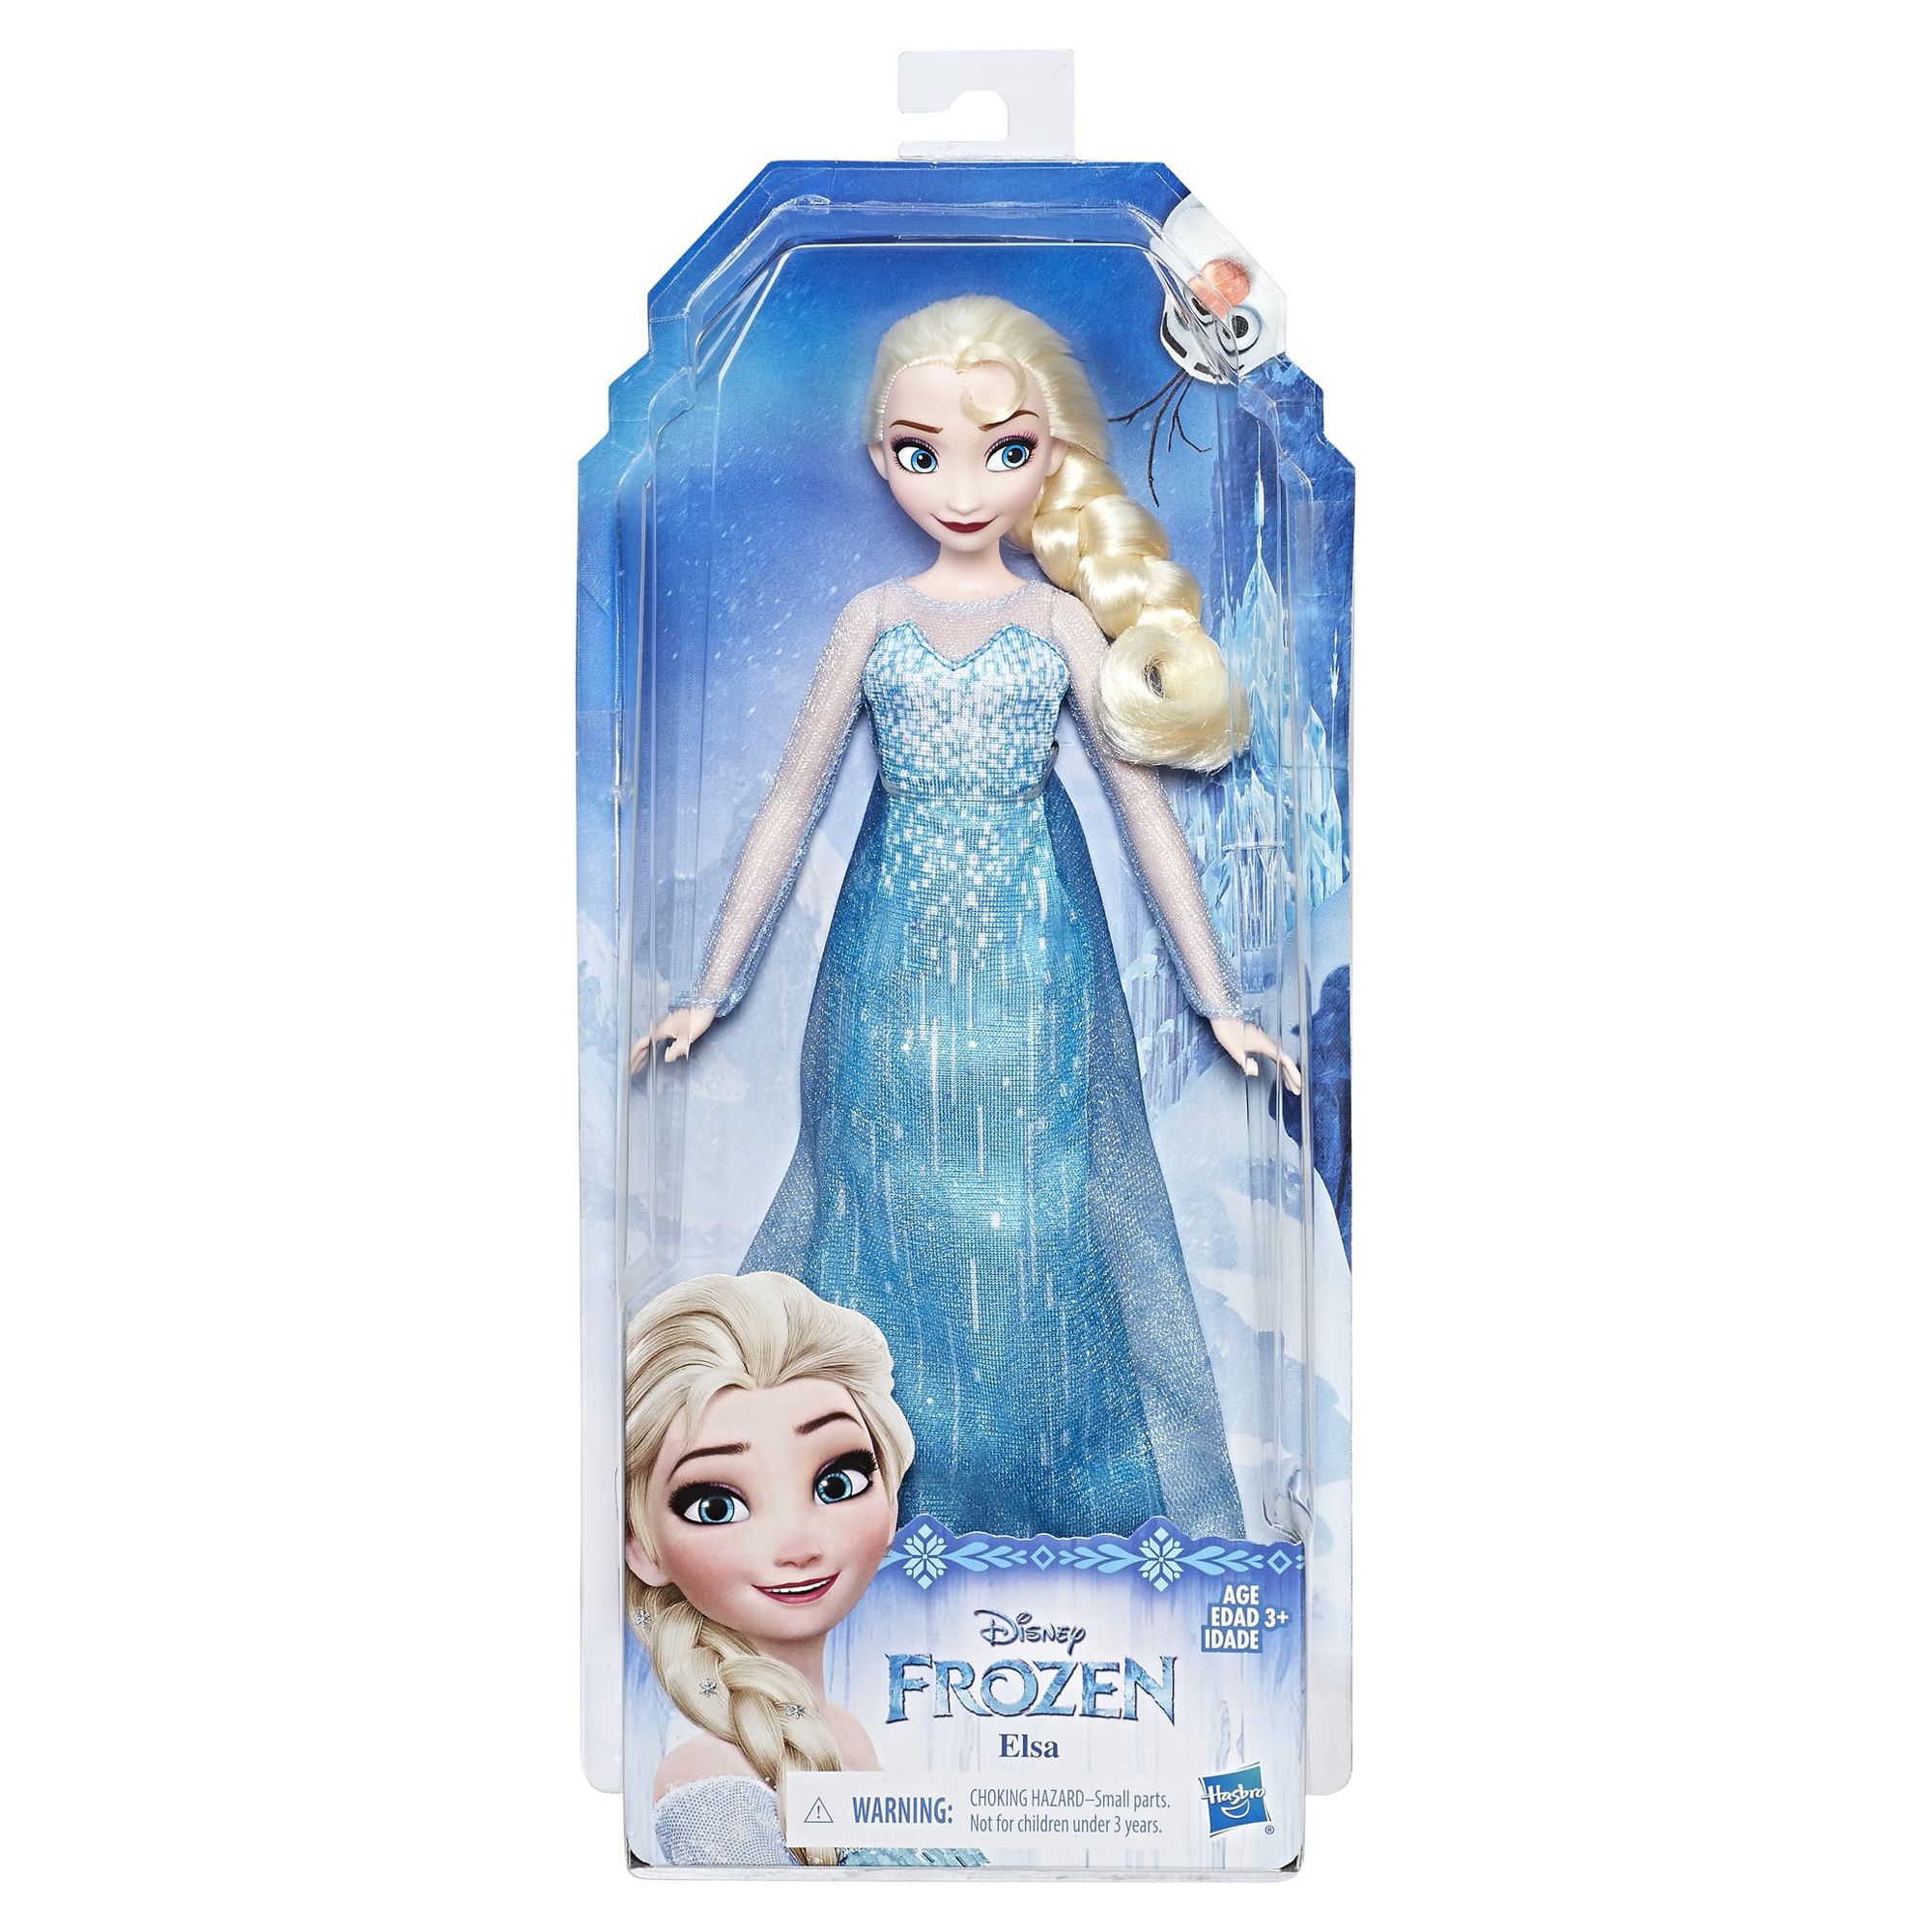 Disney Frozen Classic Fashion Elsa, for Kids Ages 3 and up, Includes Outfit and Shoes - image 3 of 7